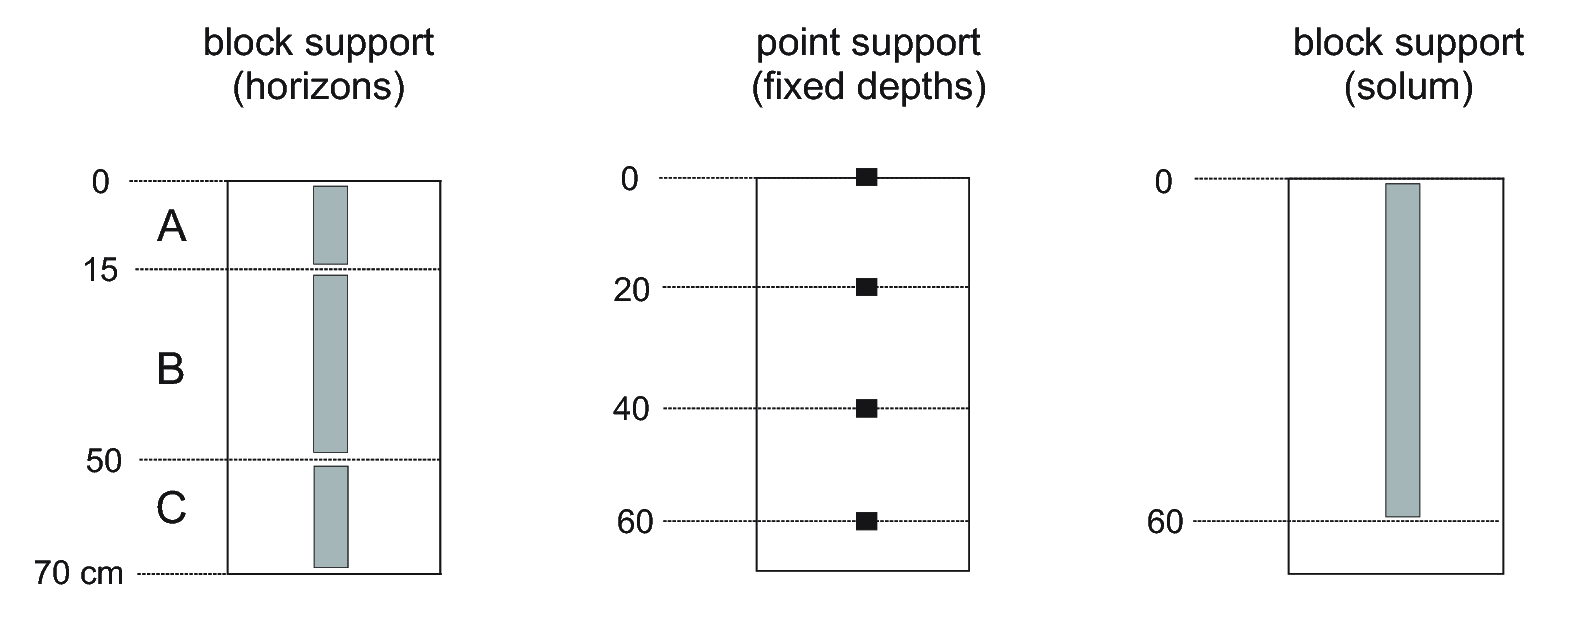 Soil observations can refer to genetic horizons (left), fixed depths i.e. point support (center) and/or can refer to aggregate values for the complete profile (right).